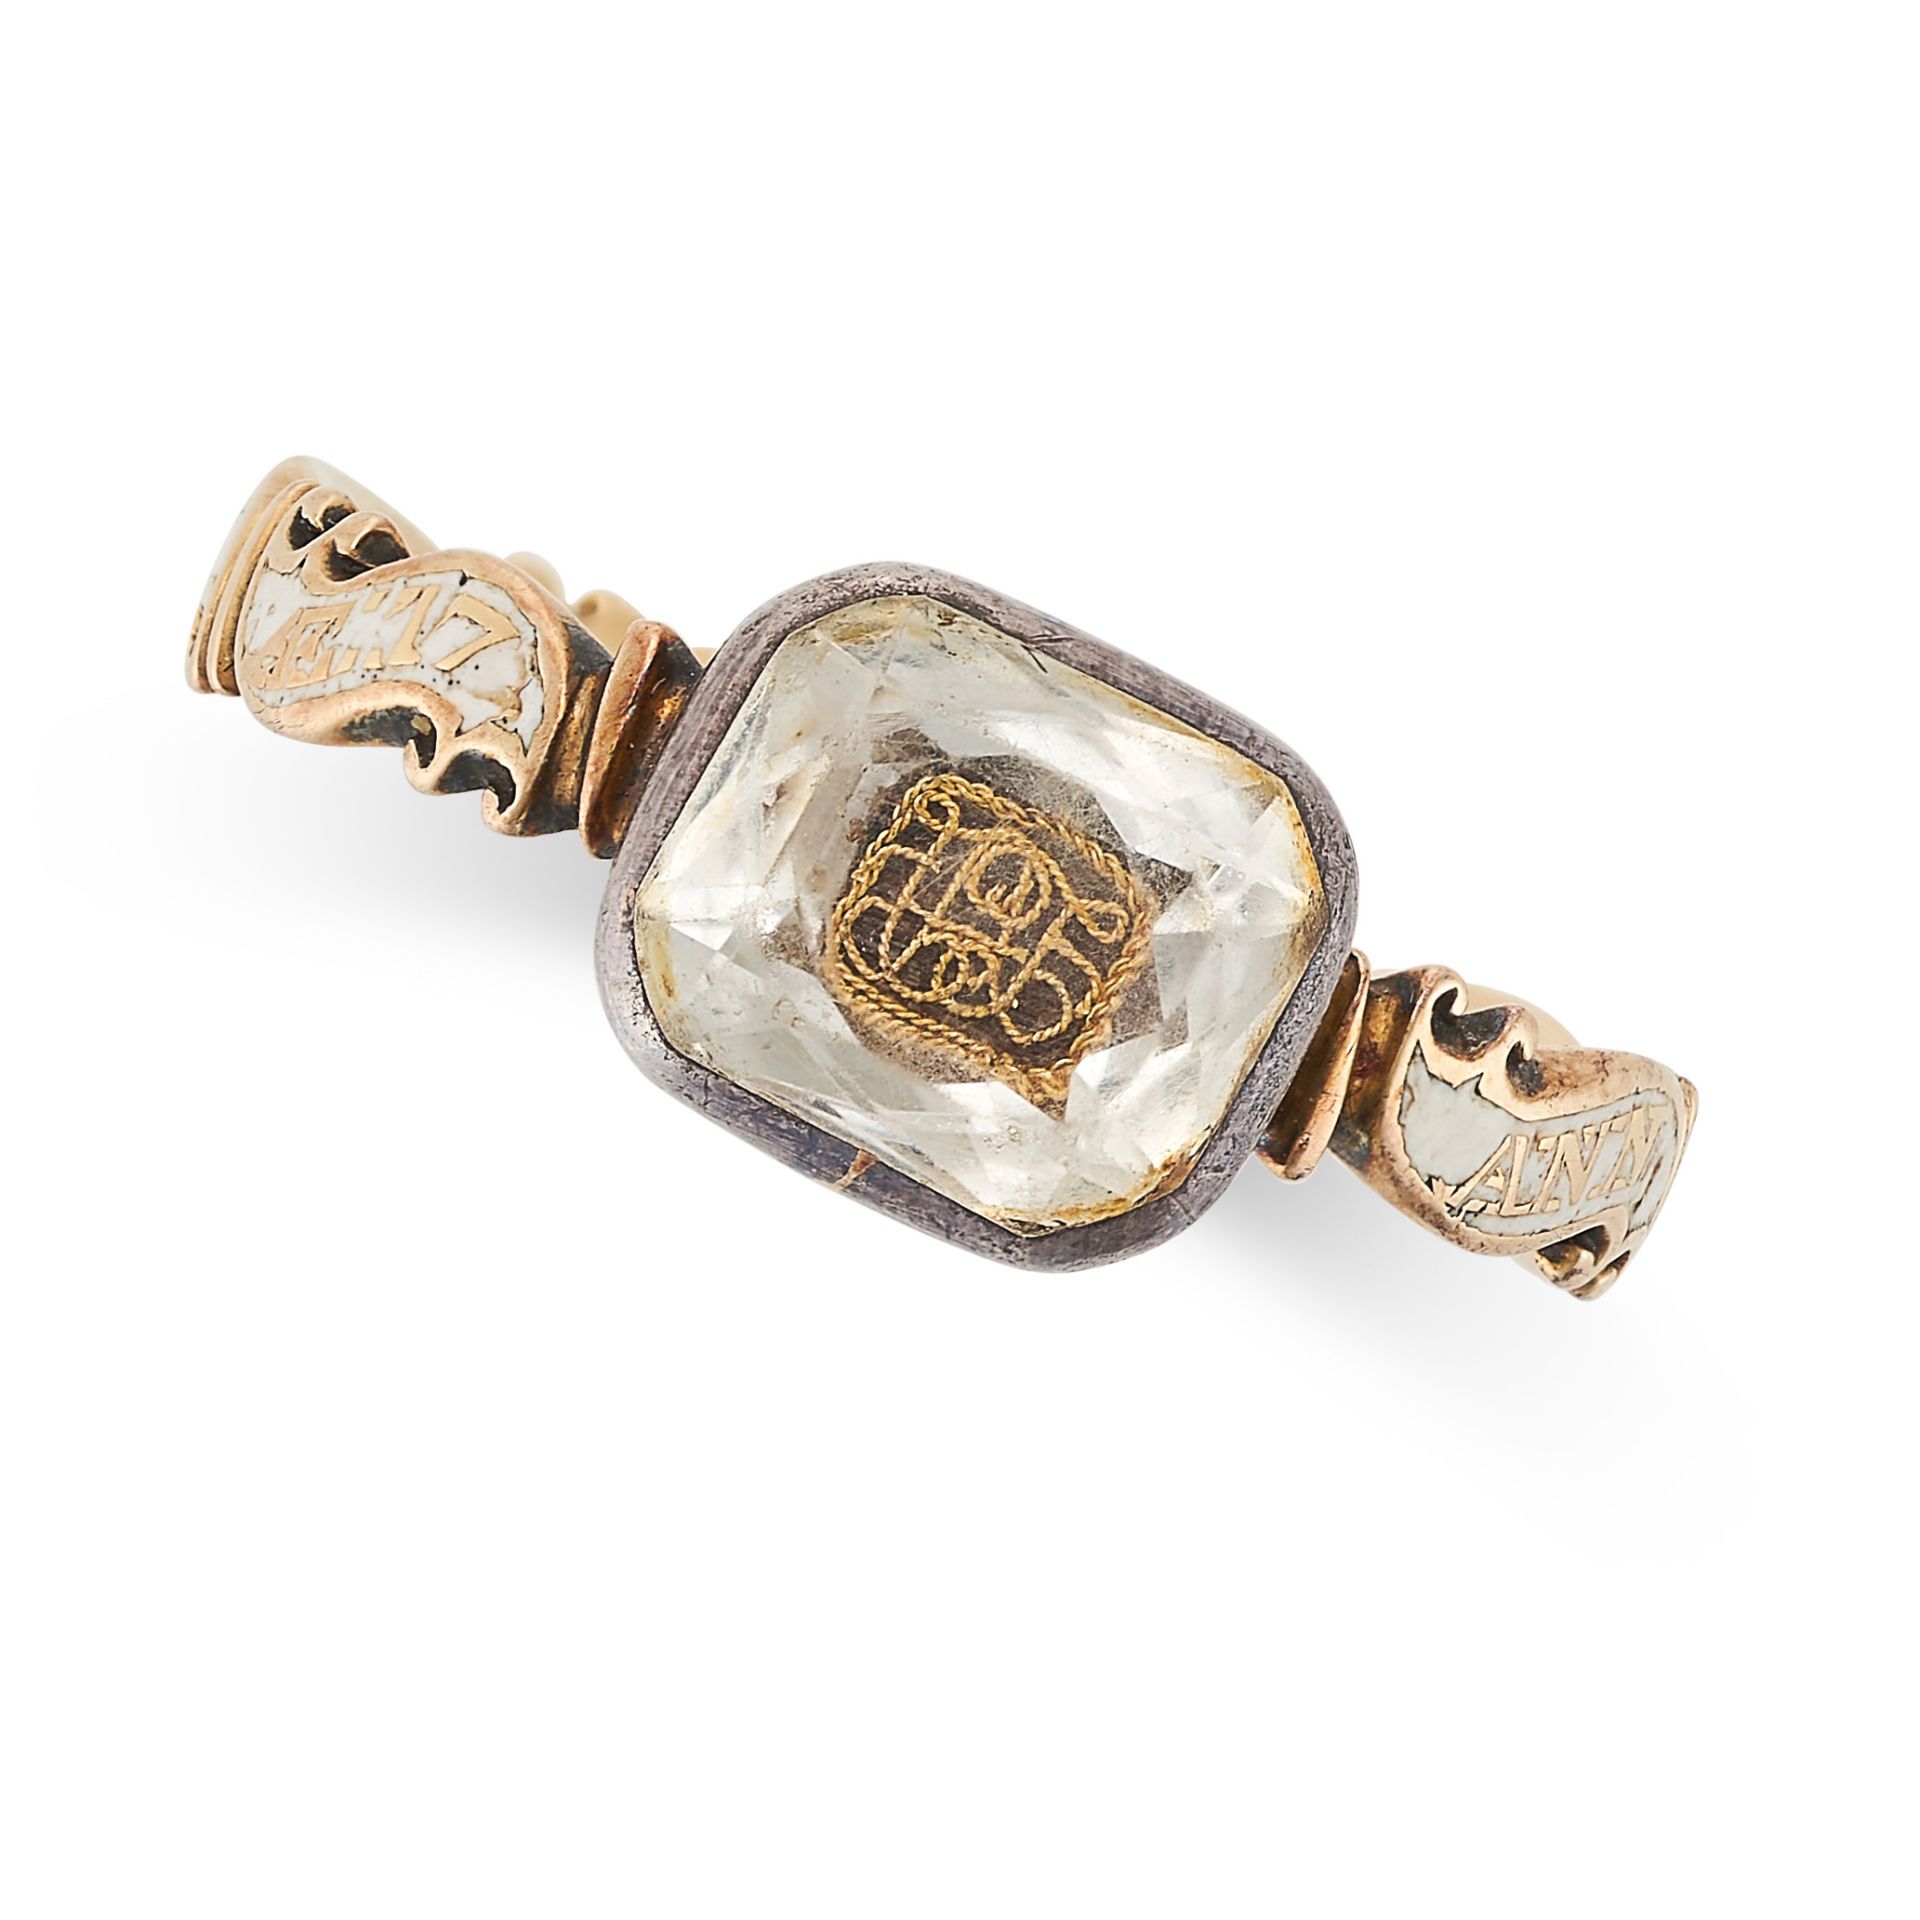 AN ANTIQUE GEORGIAN STUART CRYSTAL AND ENAMEL MOURNING RING in yellow gold, comprising a hair work